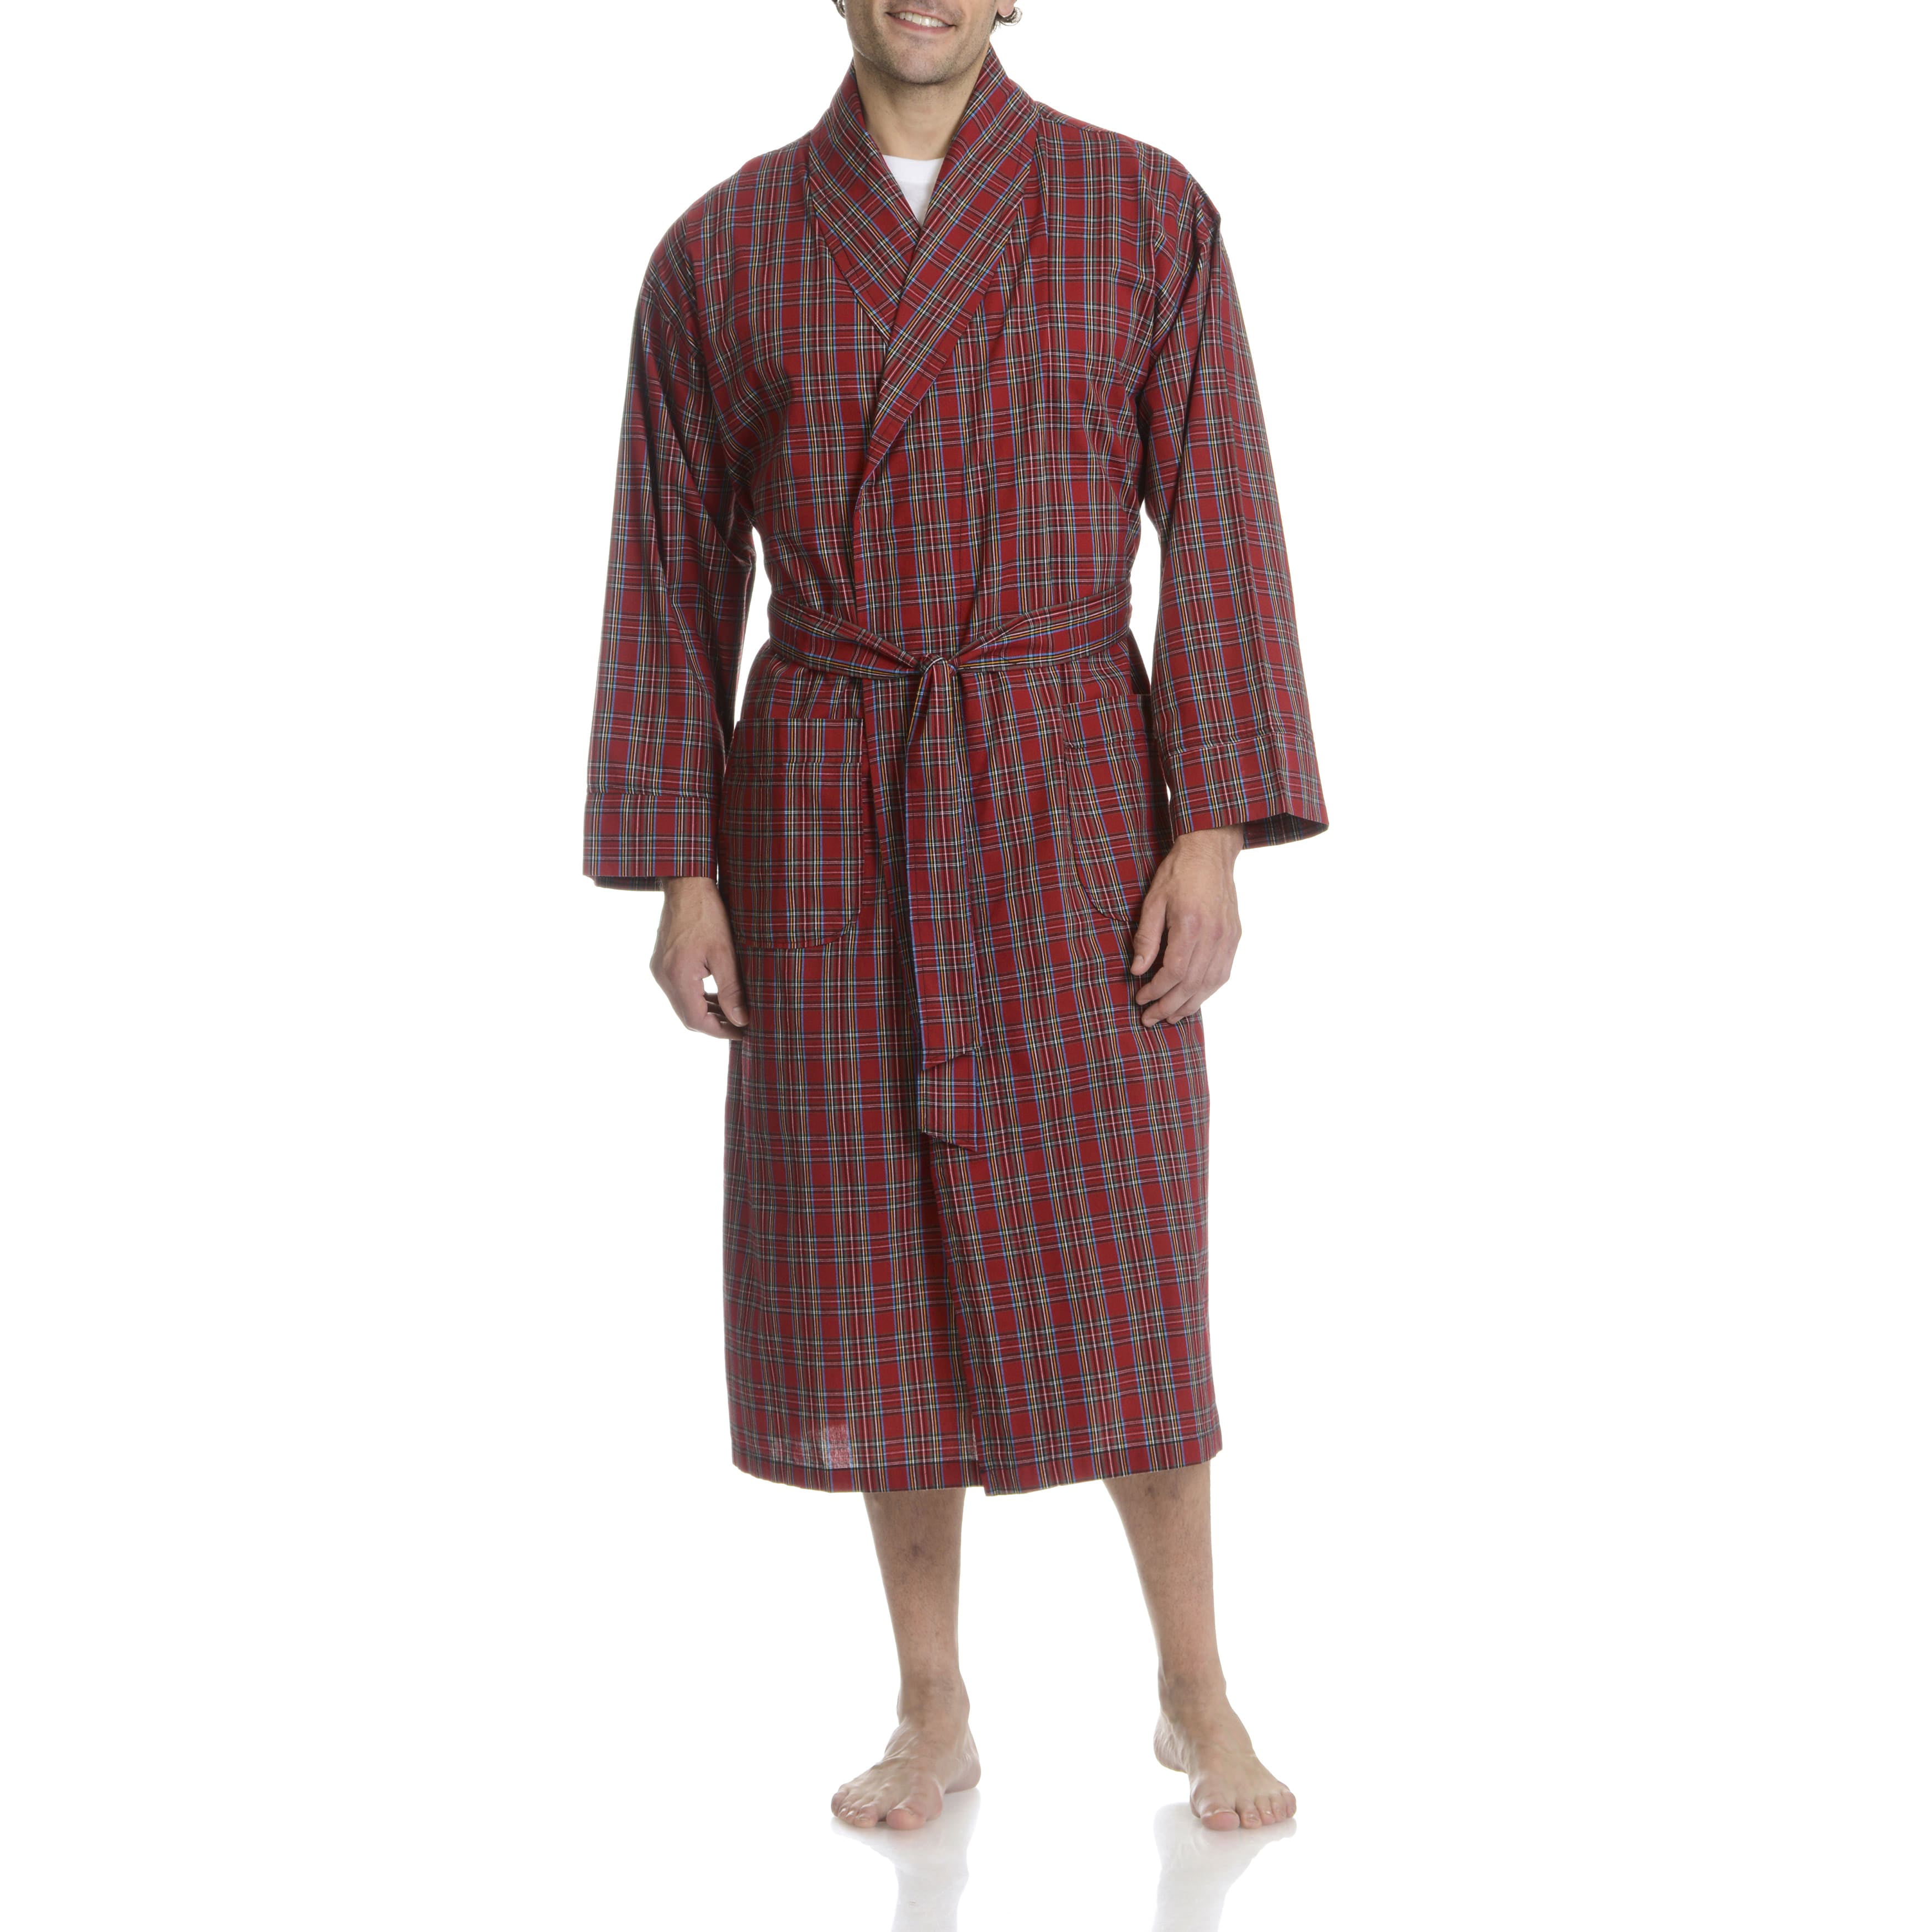 Hanes Mens Lightweight Woven Broadcloth Dressing Gown 